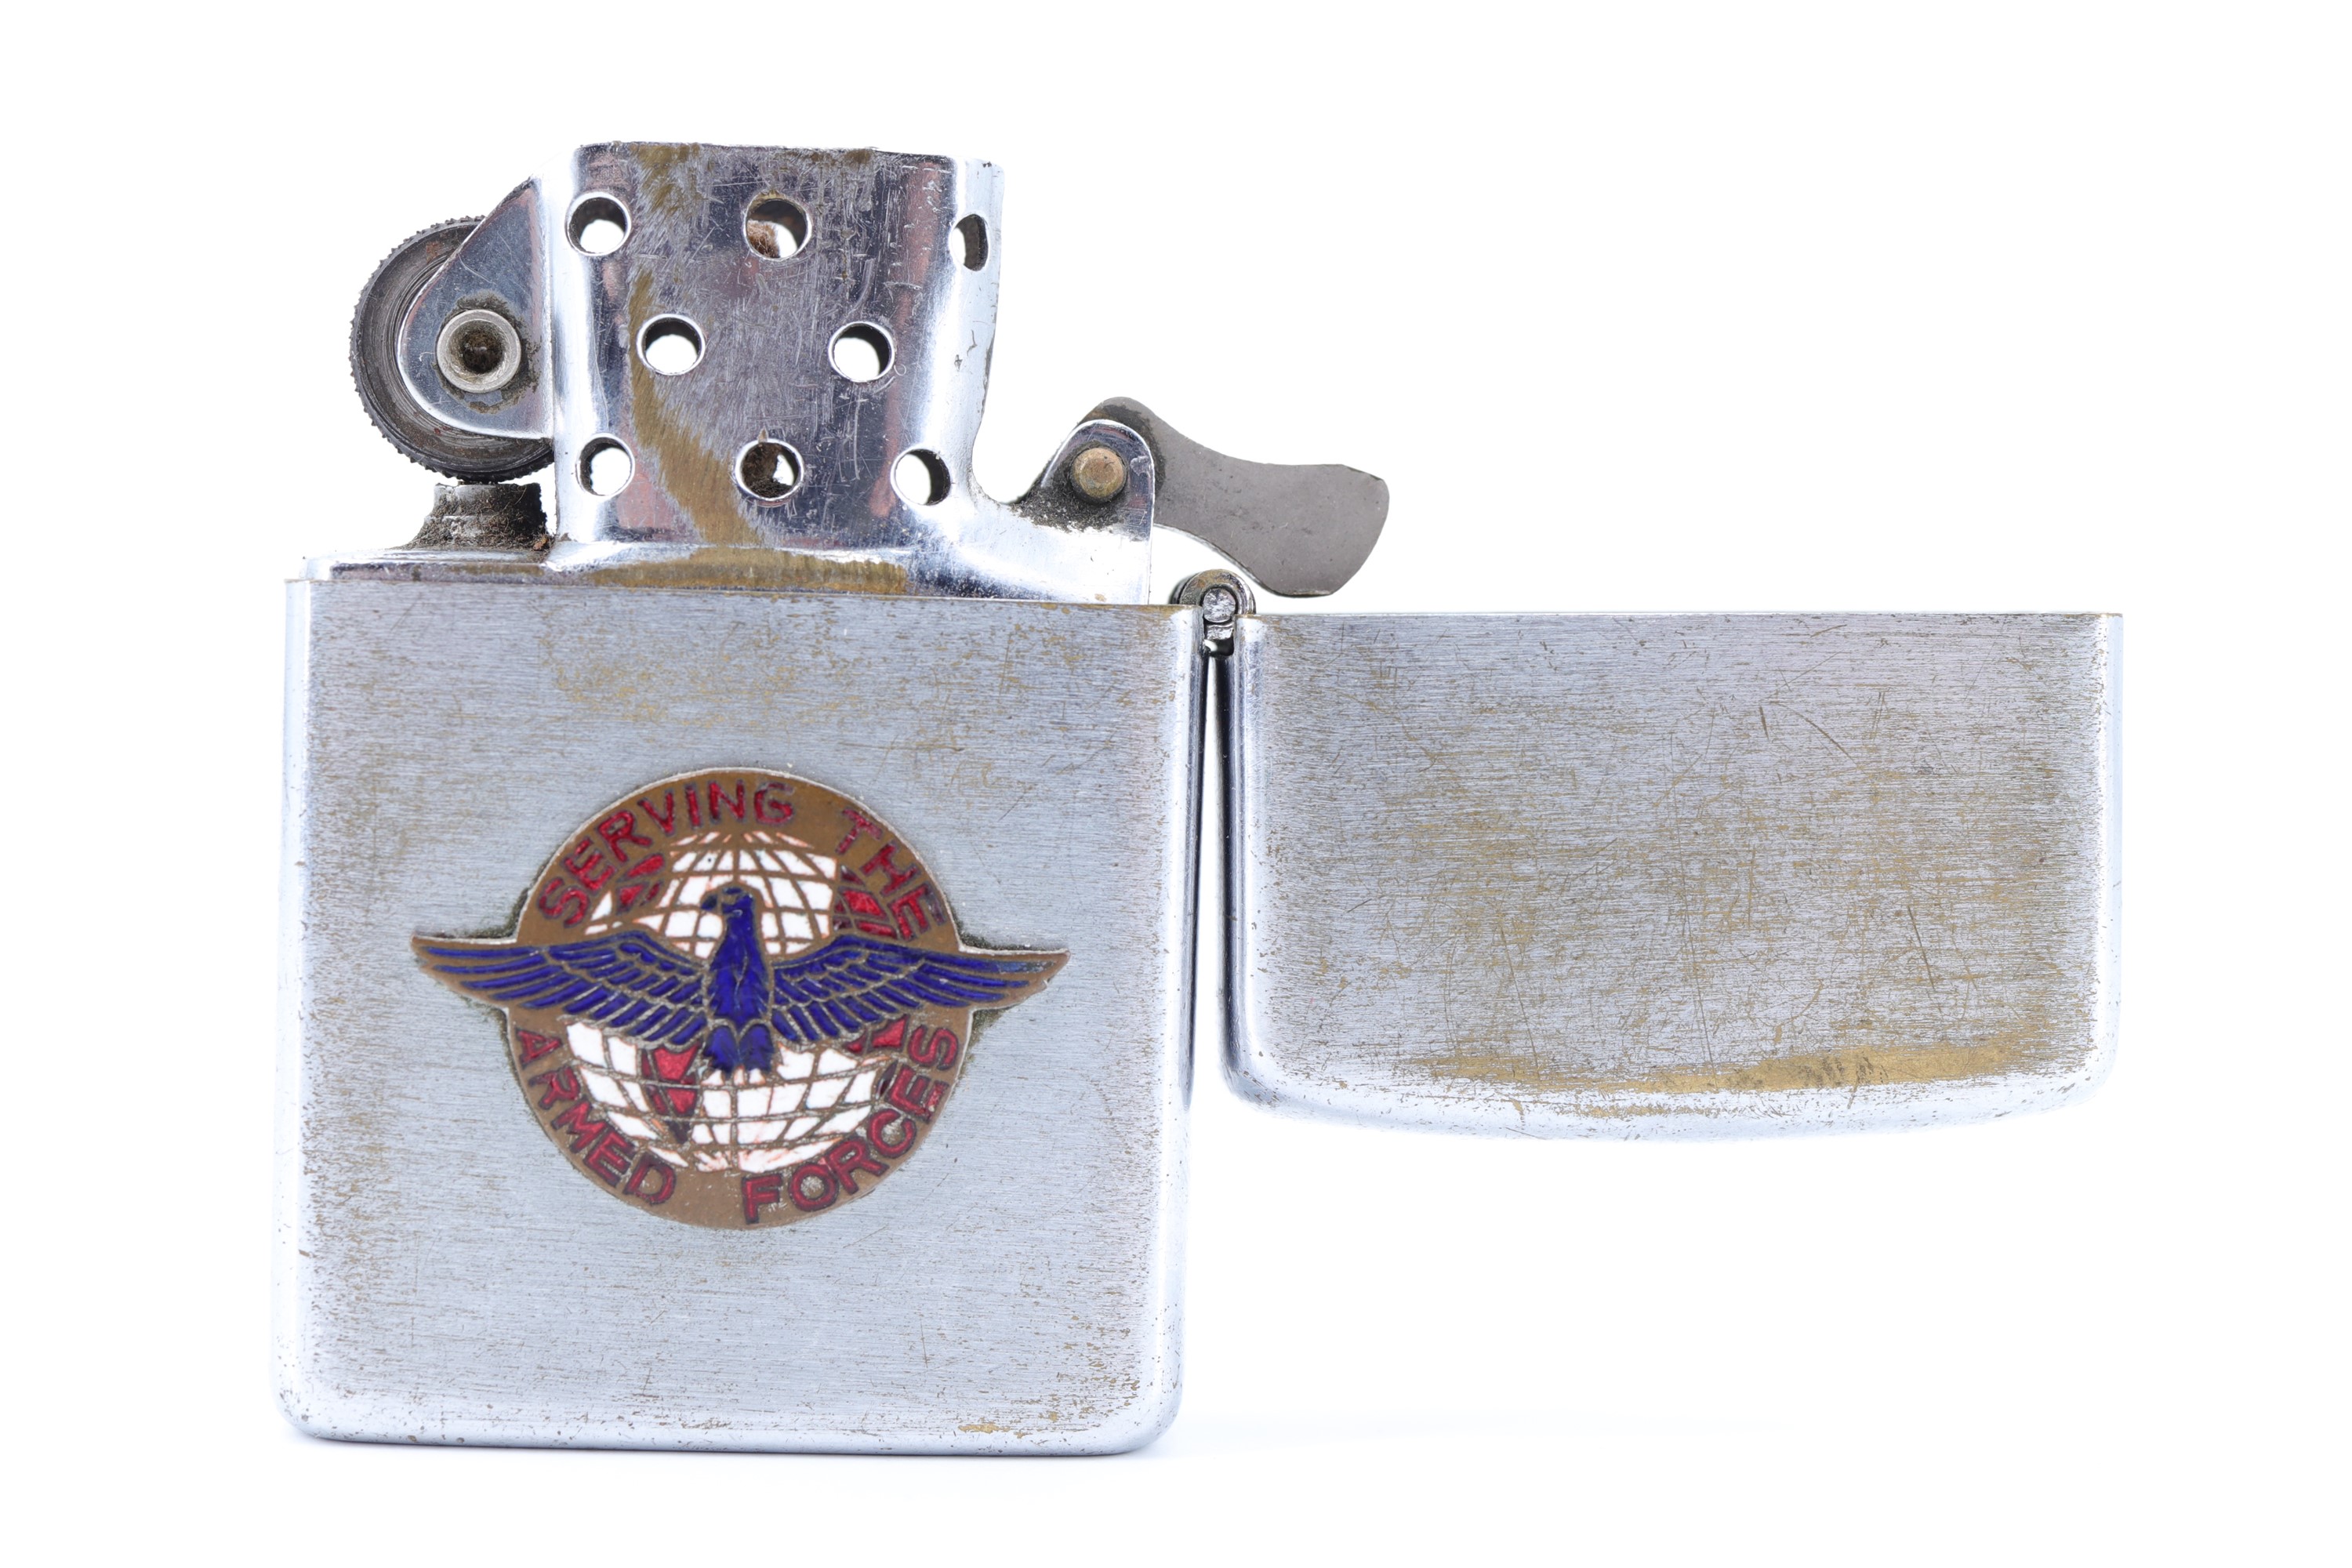 A US "Serving the Armed Forces" Zippo type cigarette lighter by Milserco Inc, a division of Military - Image 7 of 7